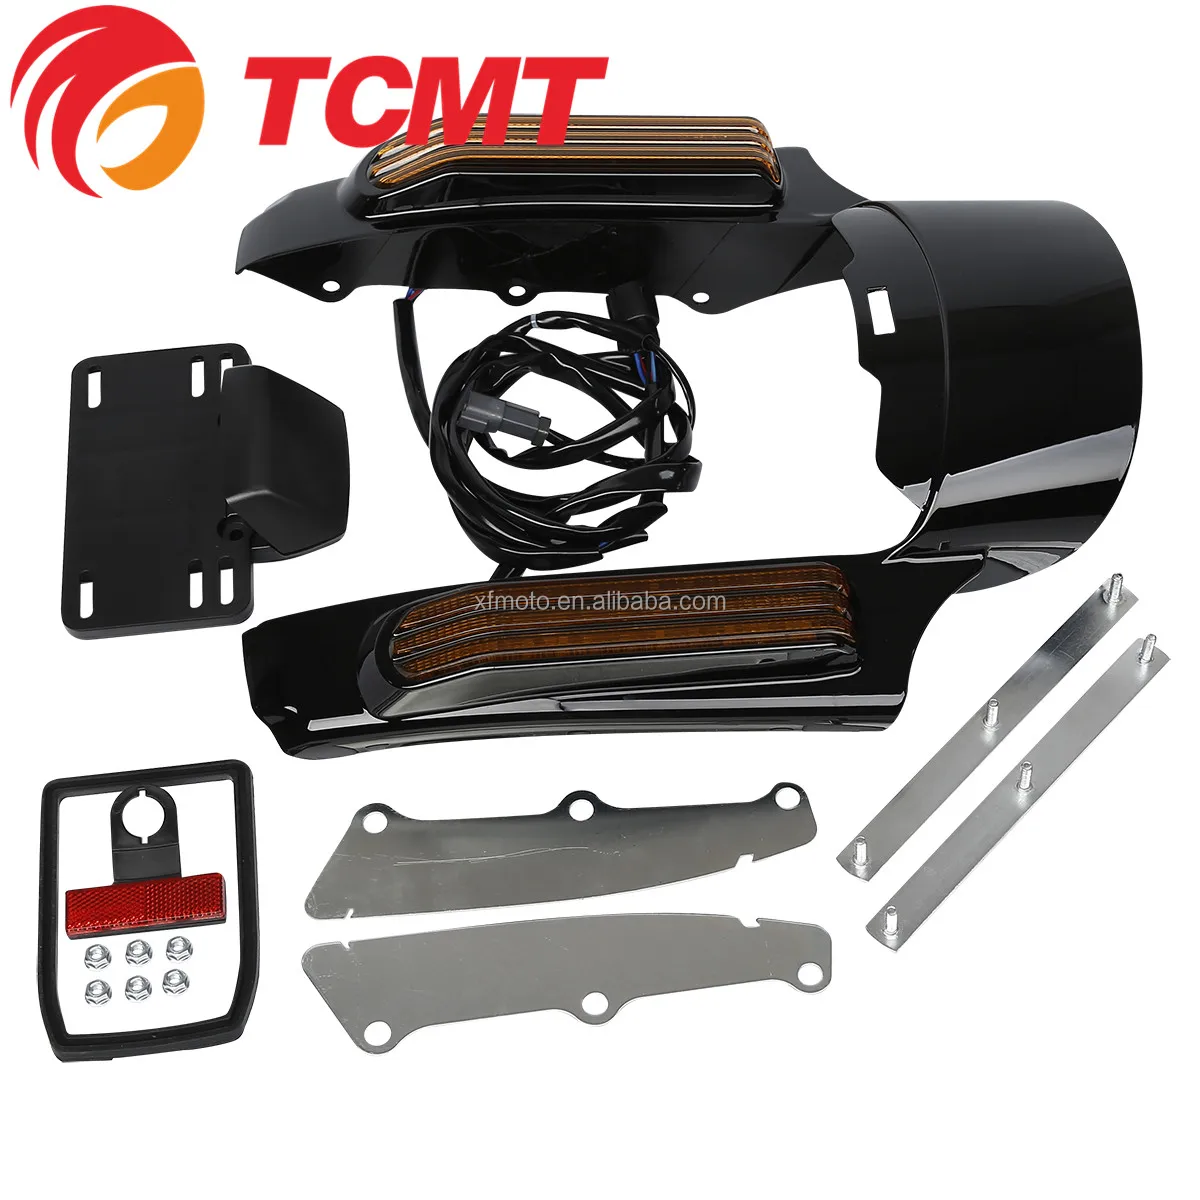 TCMT XF2906C75-Y Motorcycle Parts LED Light Rear Fender Fascia Set For Touring Road King Glide FLHX 2014-2018